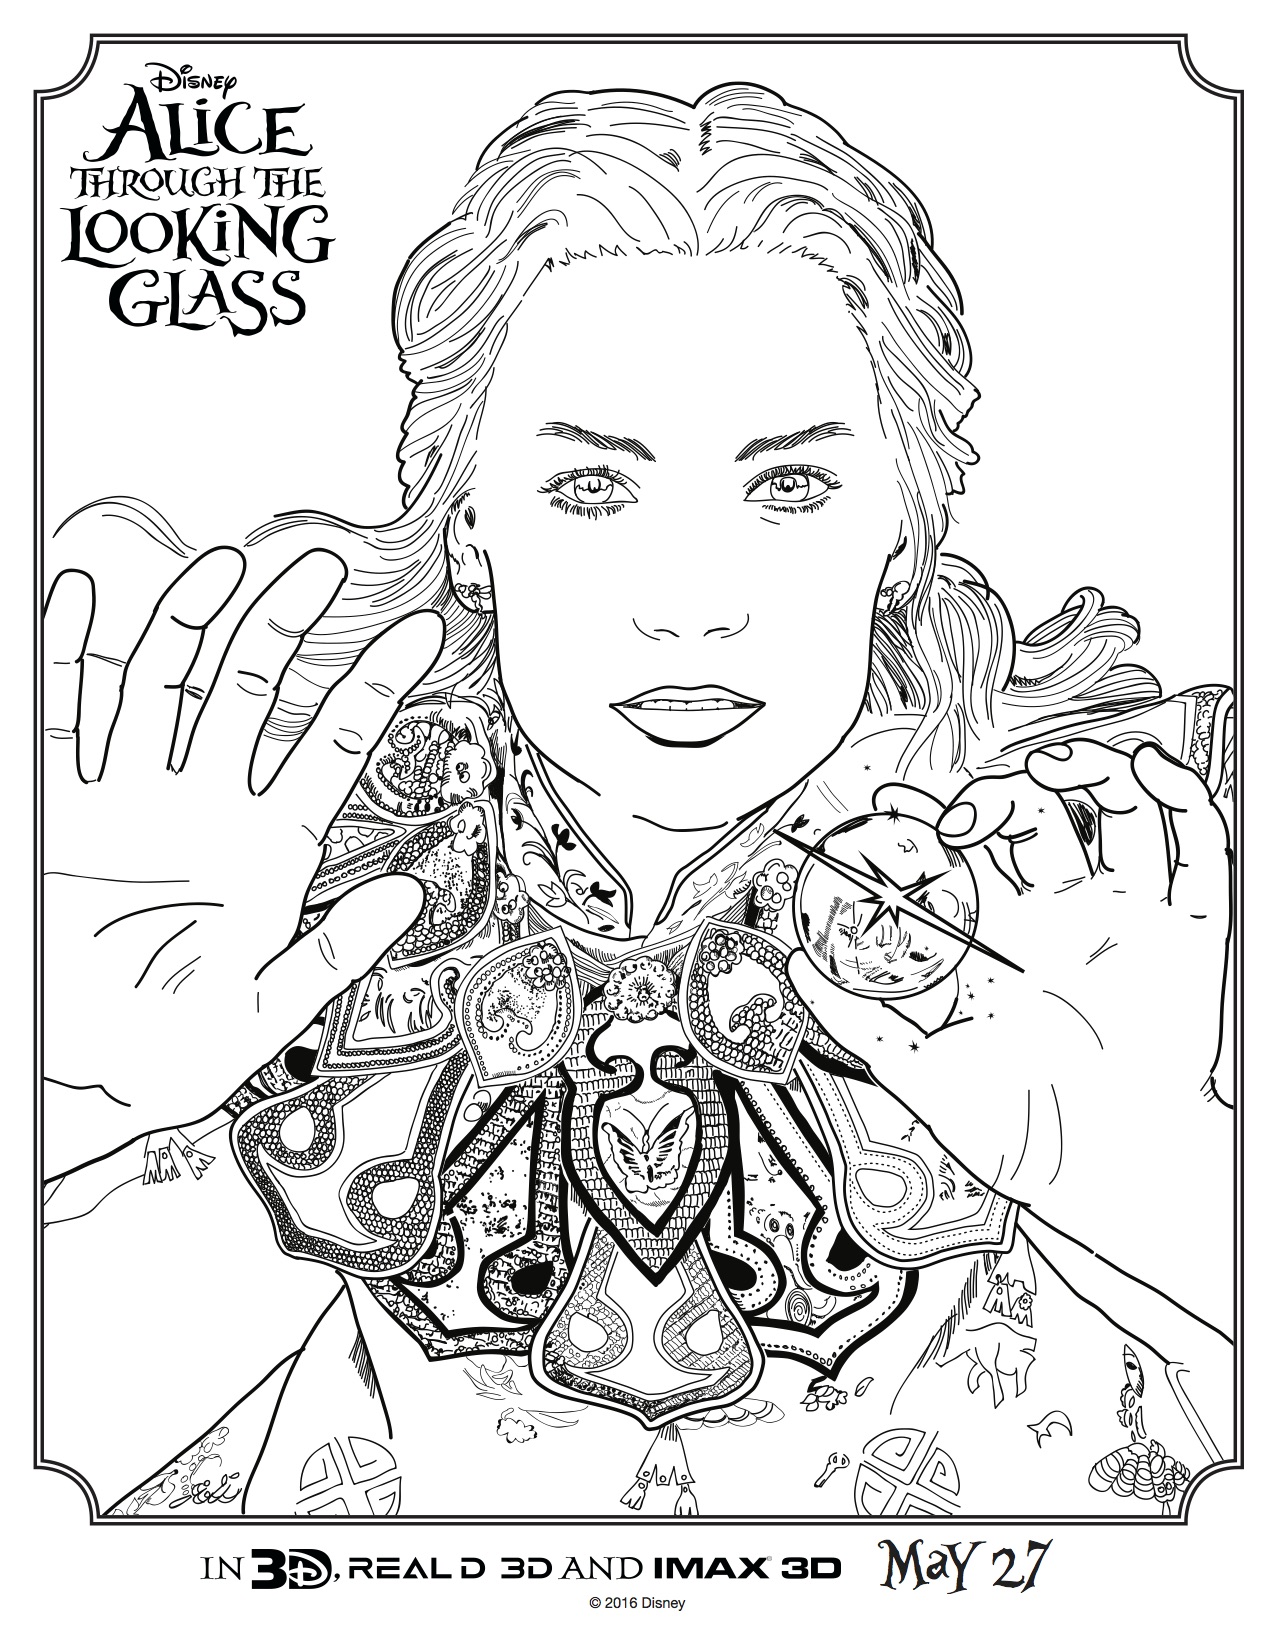 ALICE THROUGH THE LOOKING GLASS Coloring Sheets and Activity 